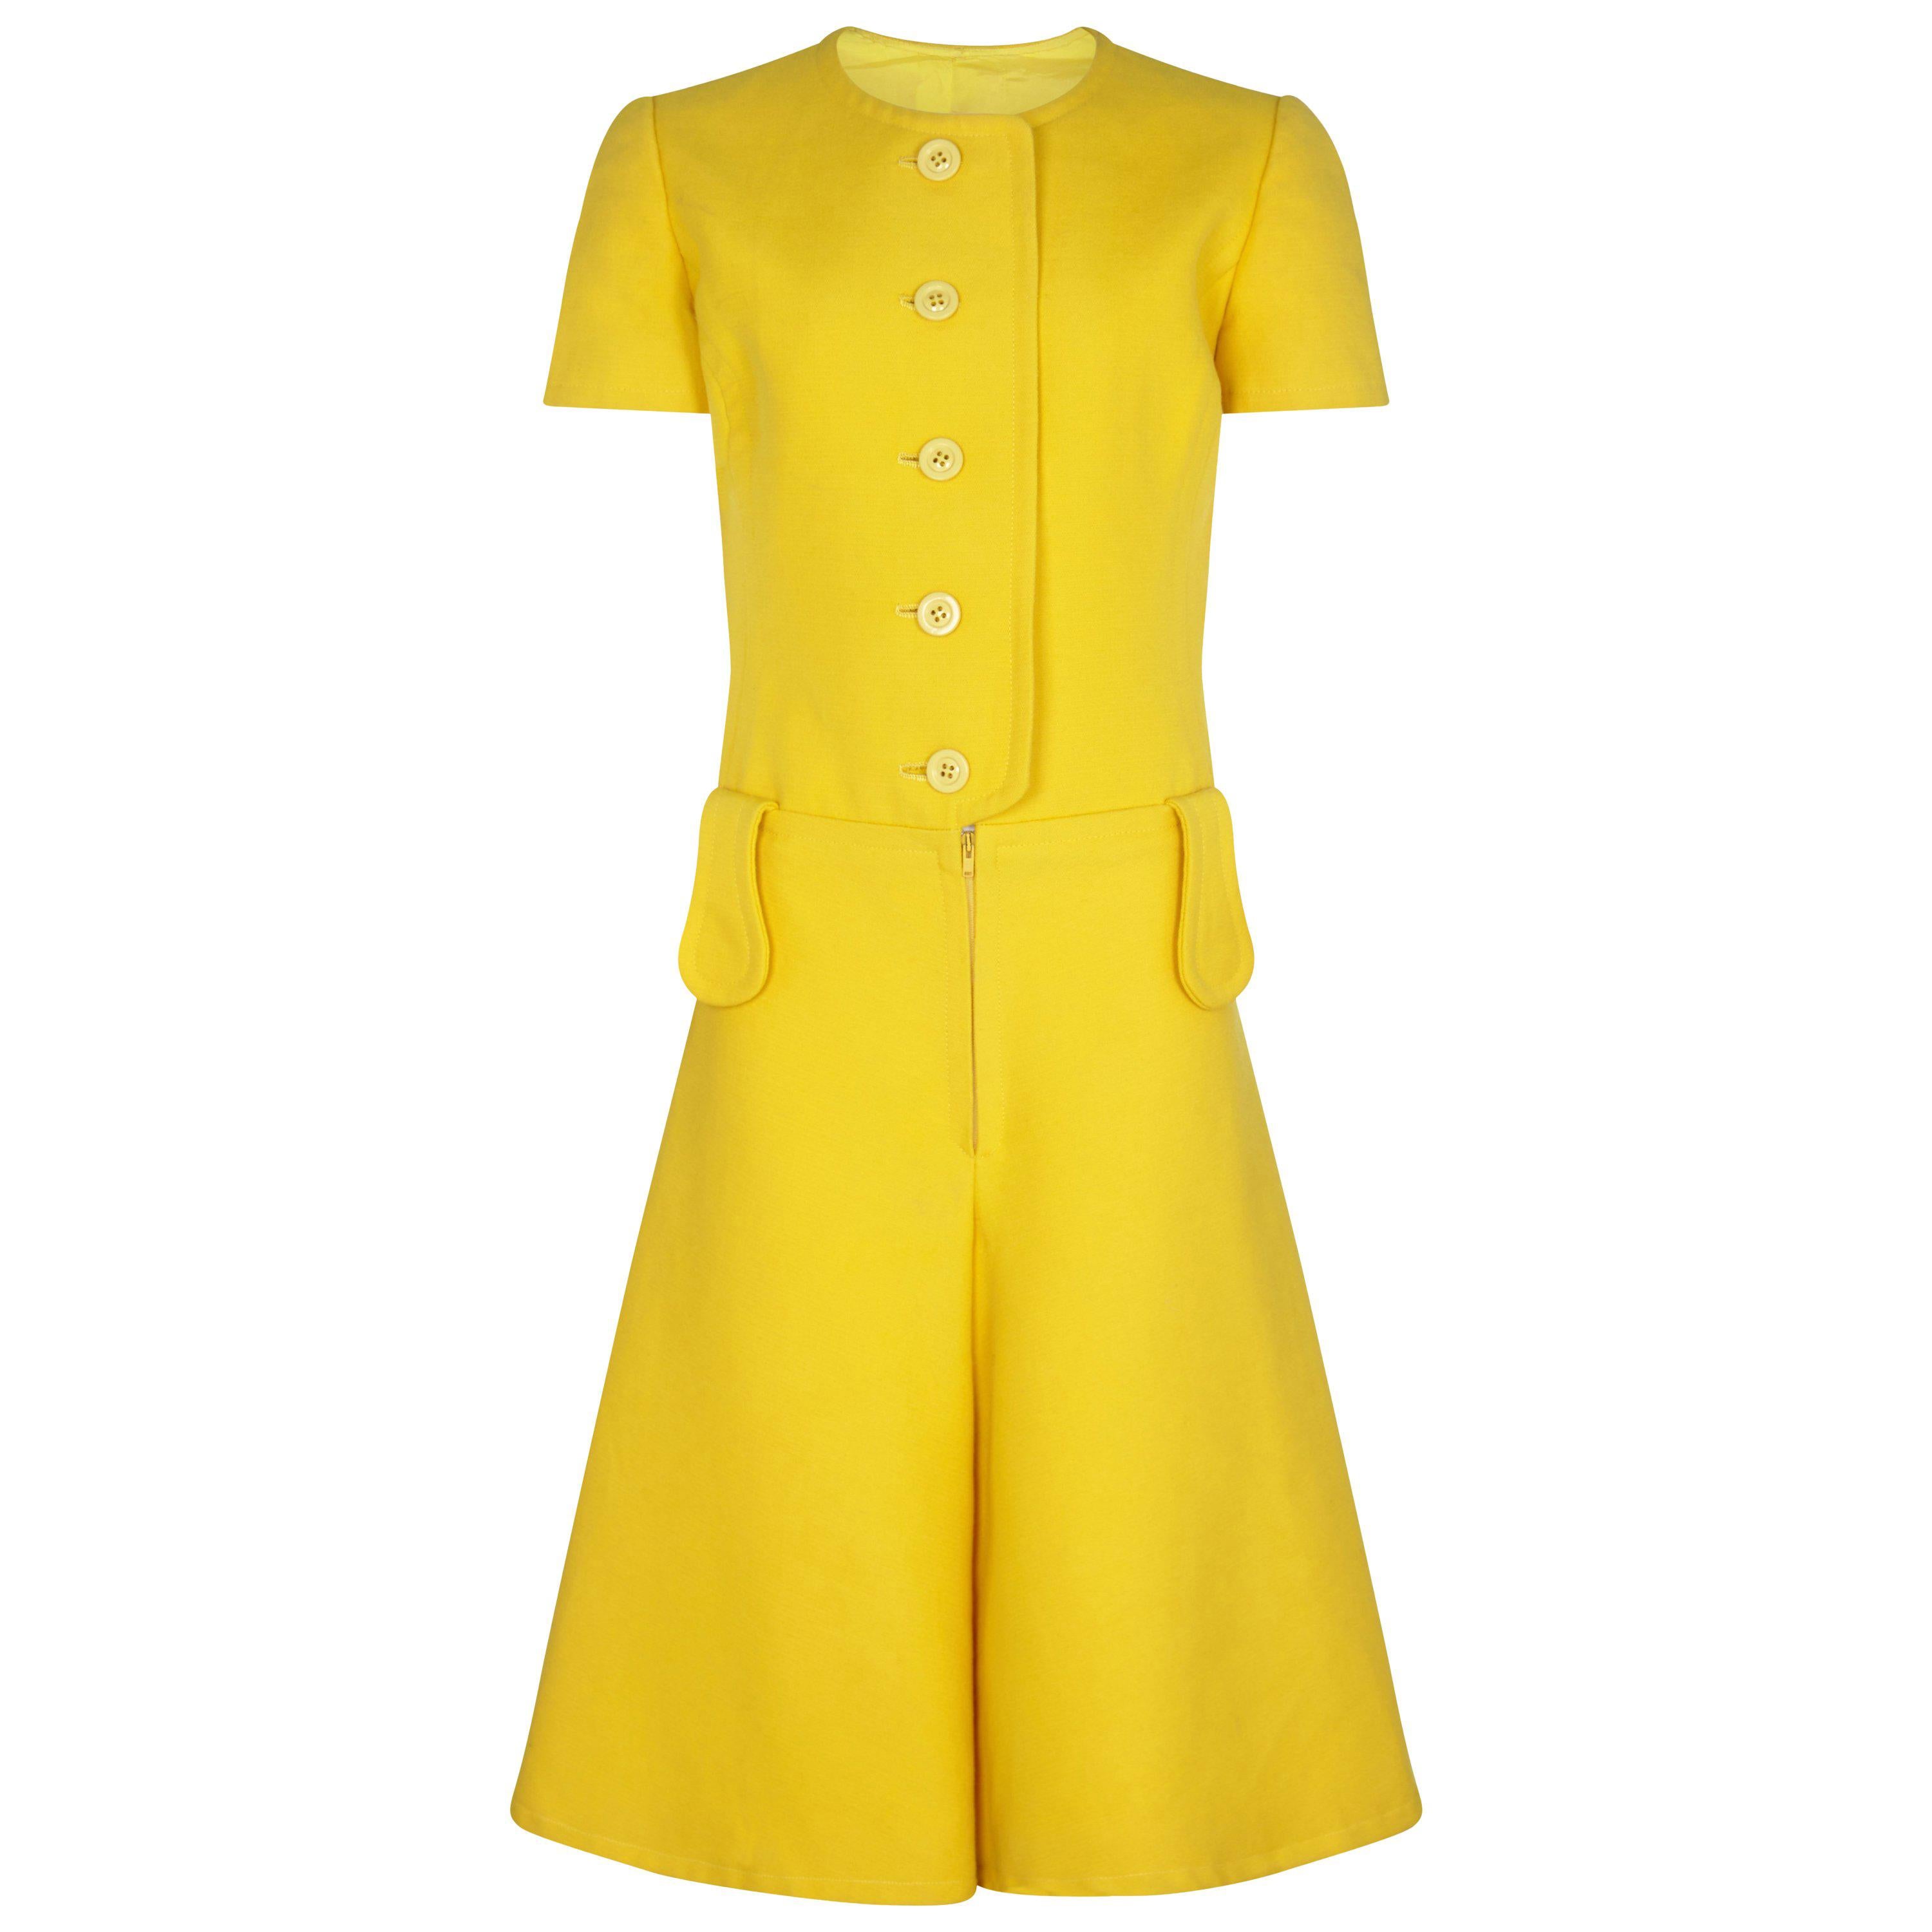 1960s French Couture Yellow Mod Playsuit With Oversized Belt Loops